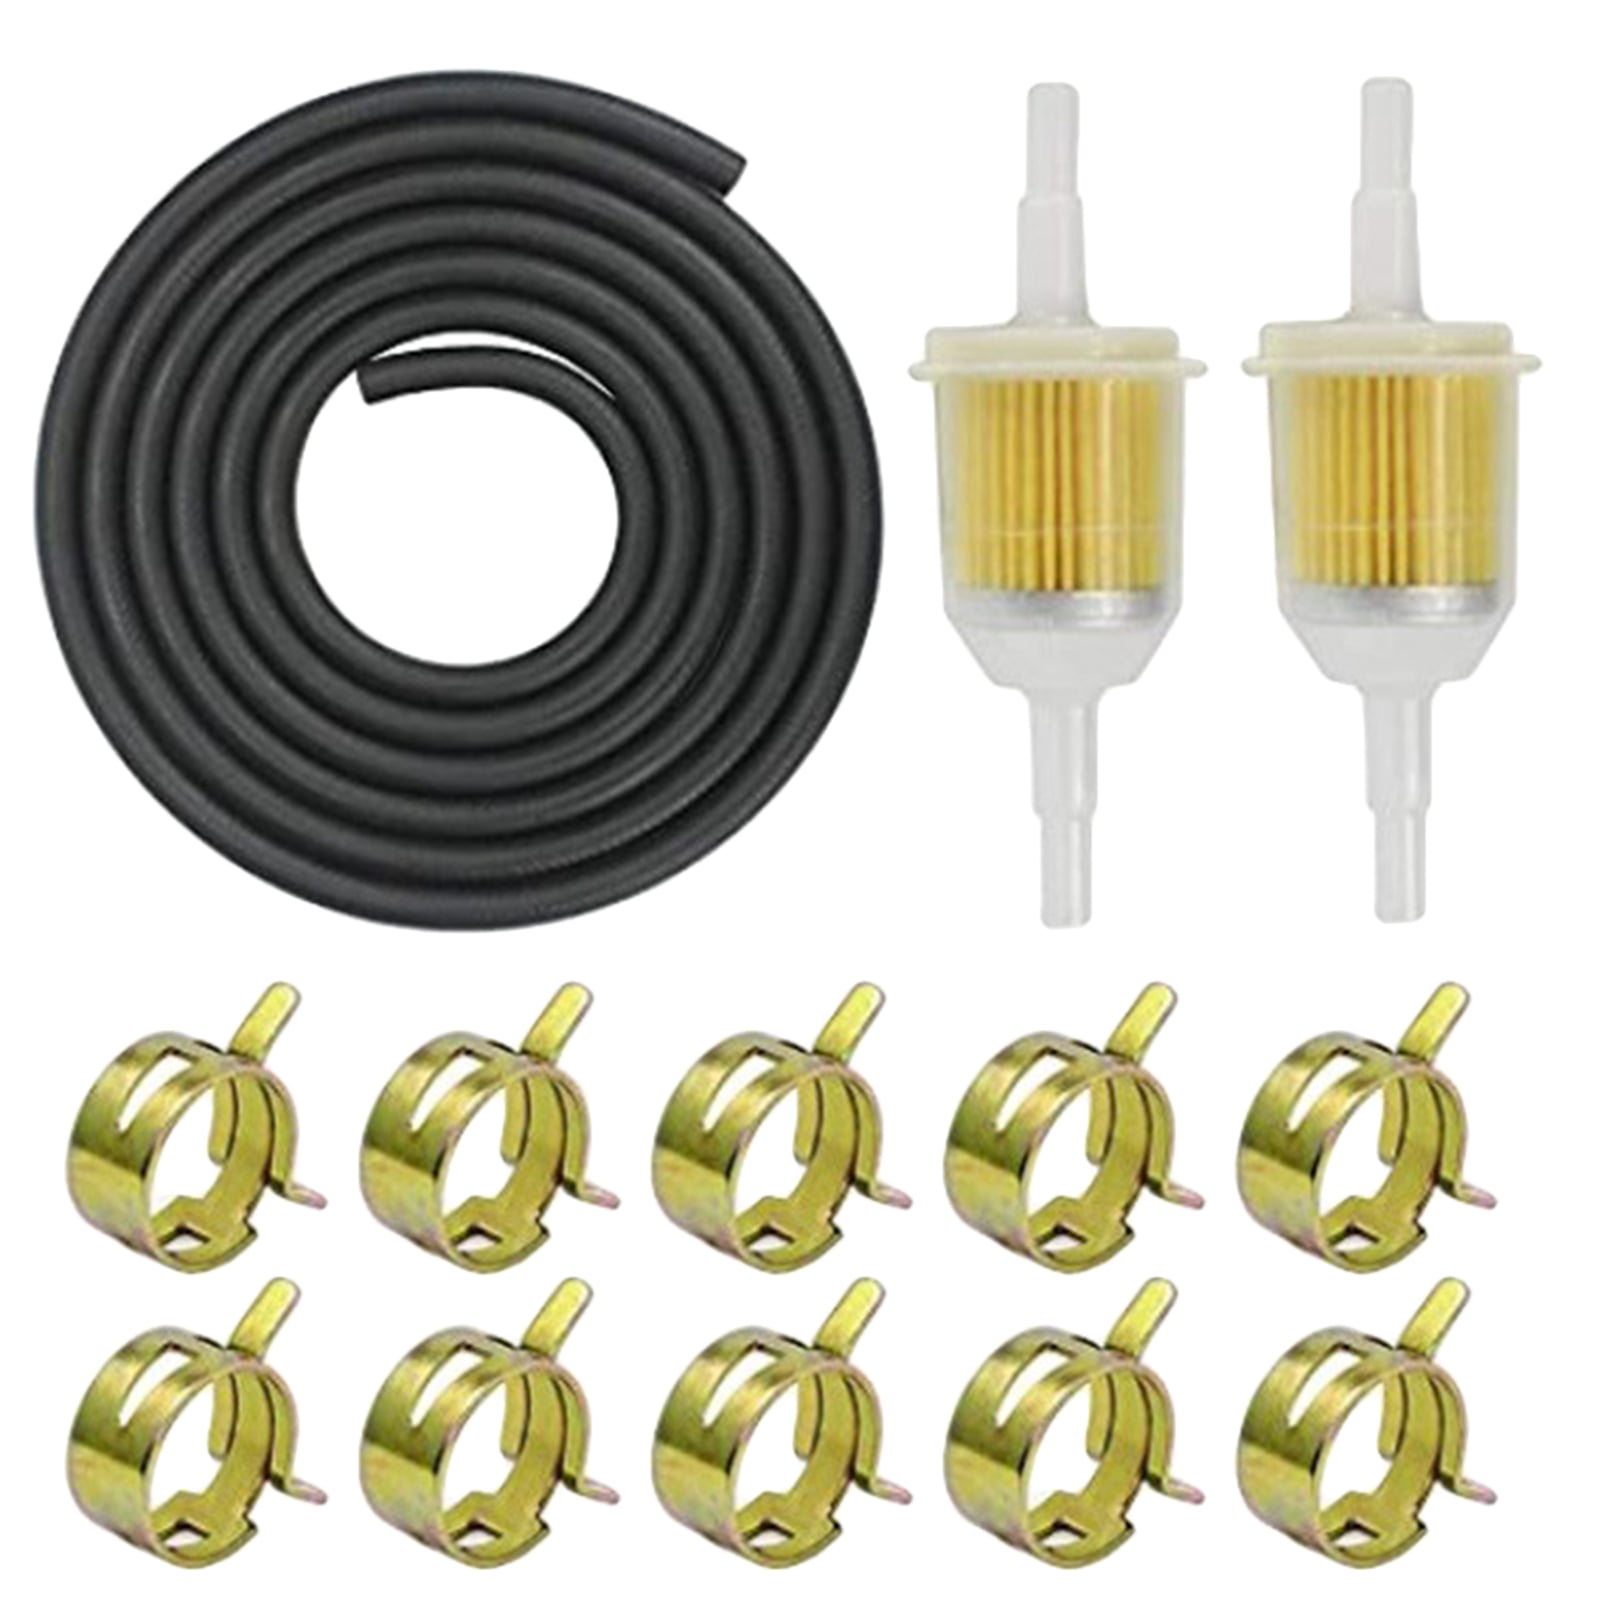 4 Sizes Gas Fuel Line Hose Yellow 16Ft Fuel Tube fits 2 Cycle Small Engine USA